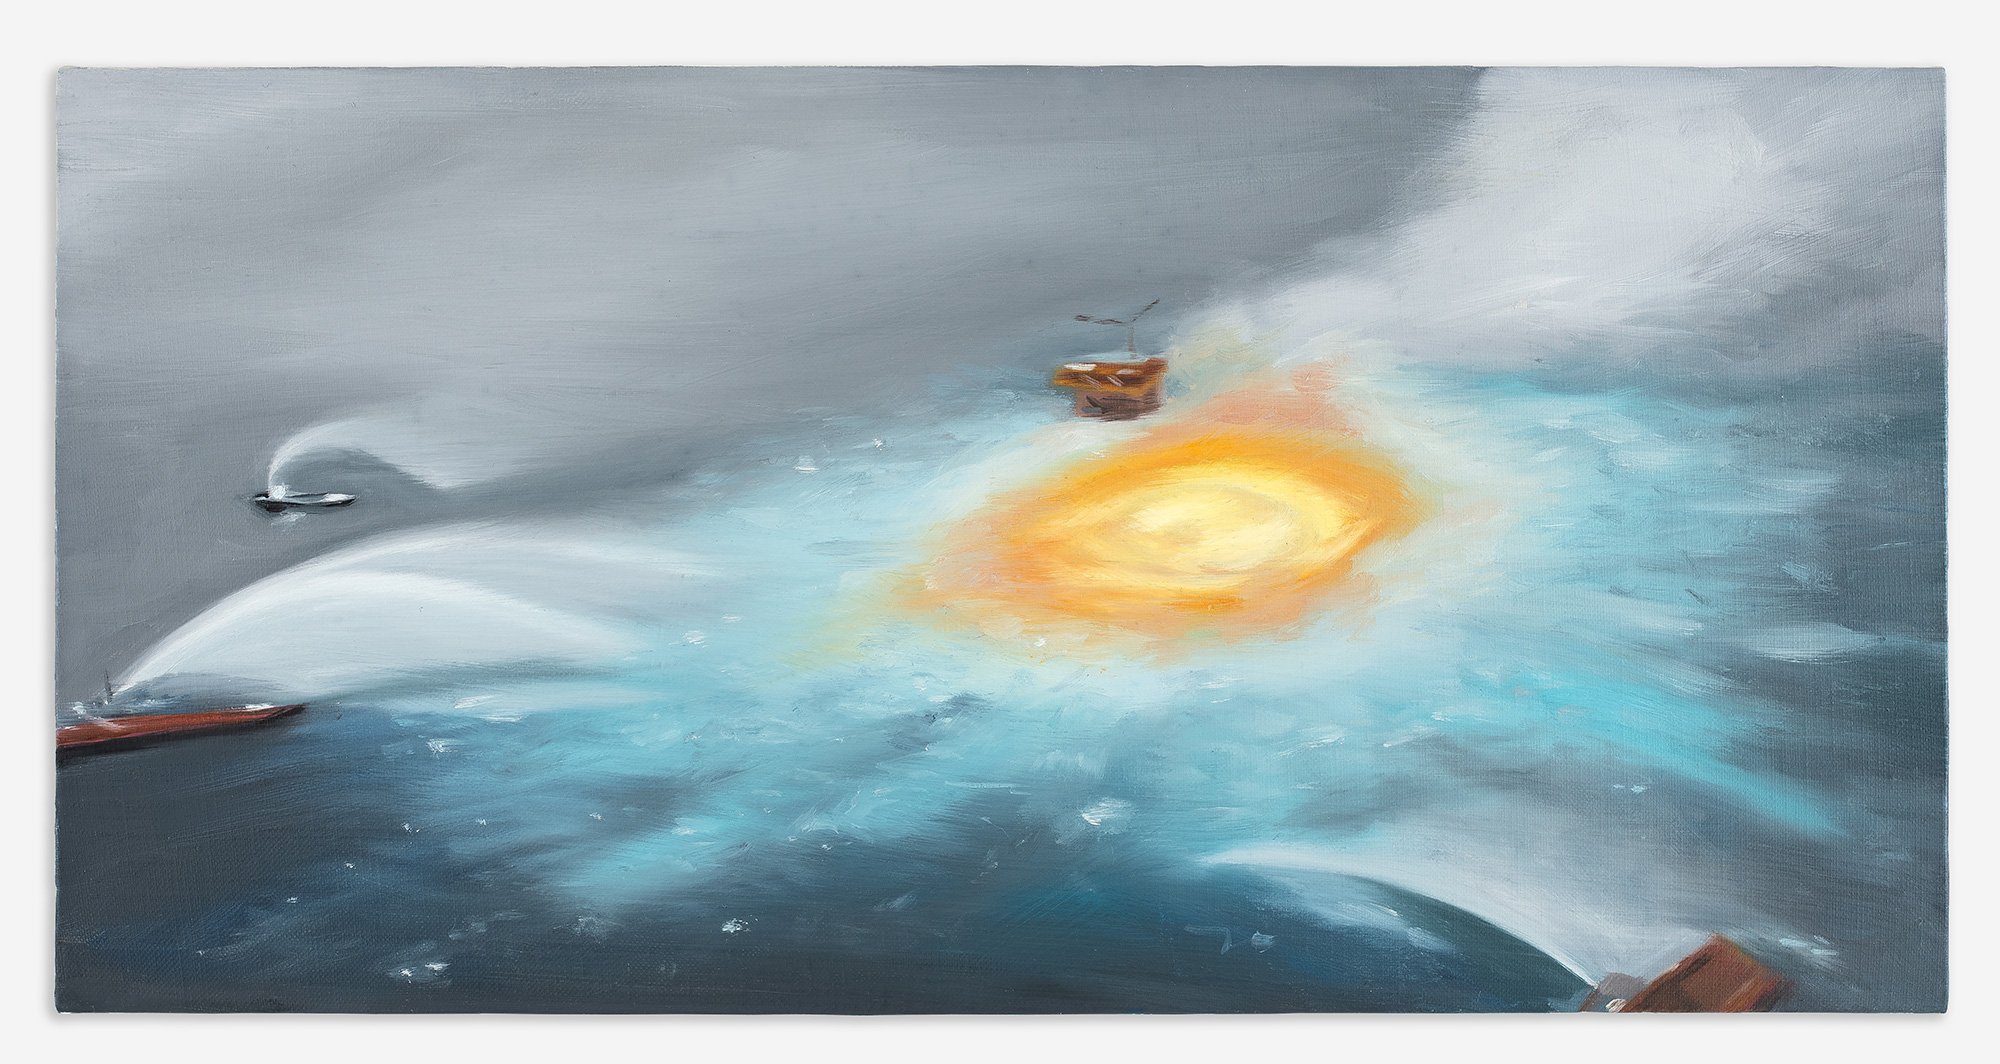   Gulf of Mexico,  2021  Oil on linen  12 x 24 inches / 30.5 x 60.9 cm 